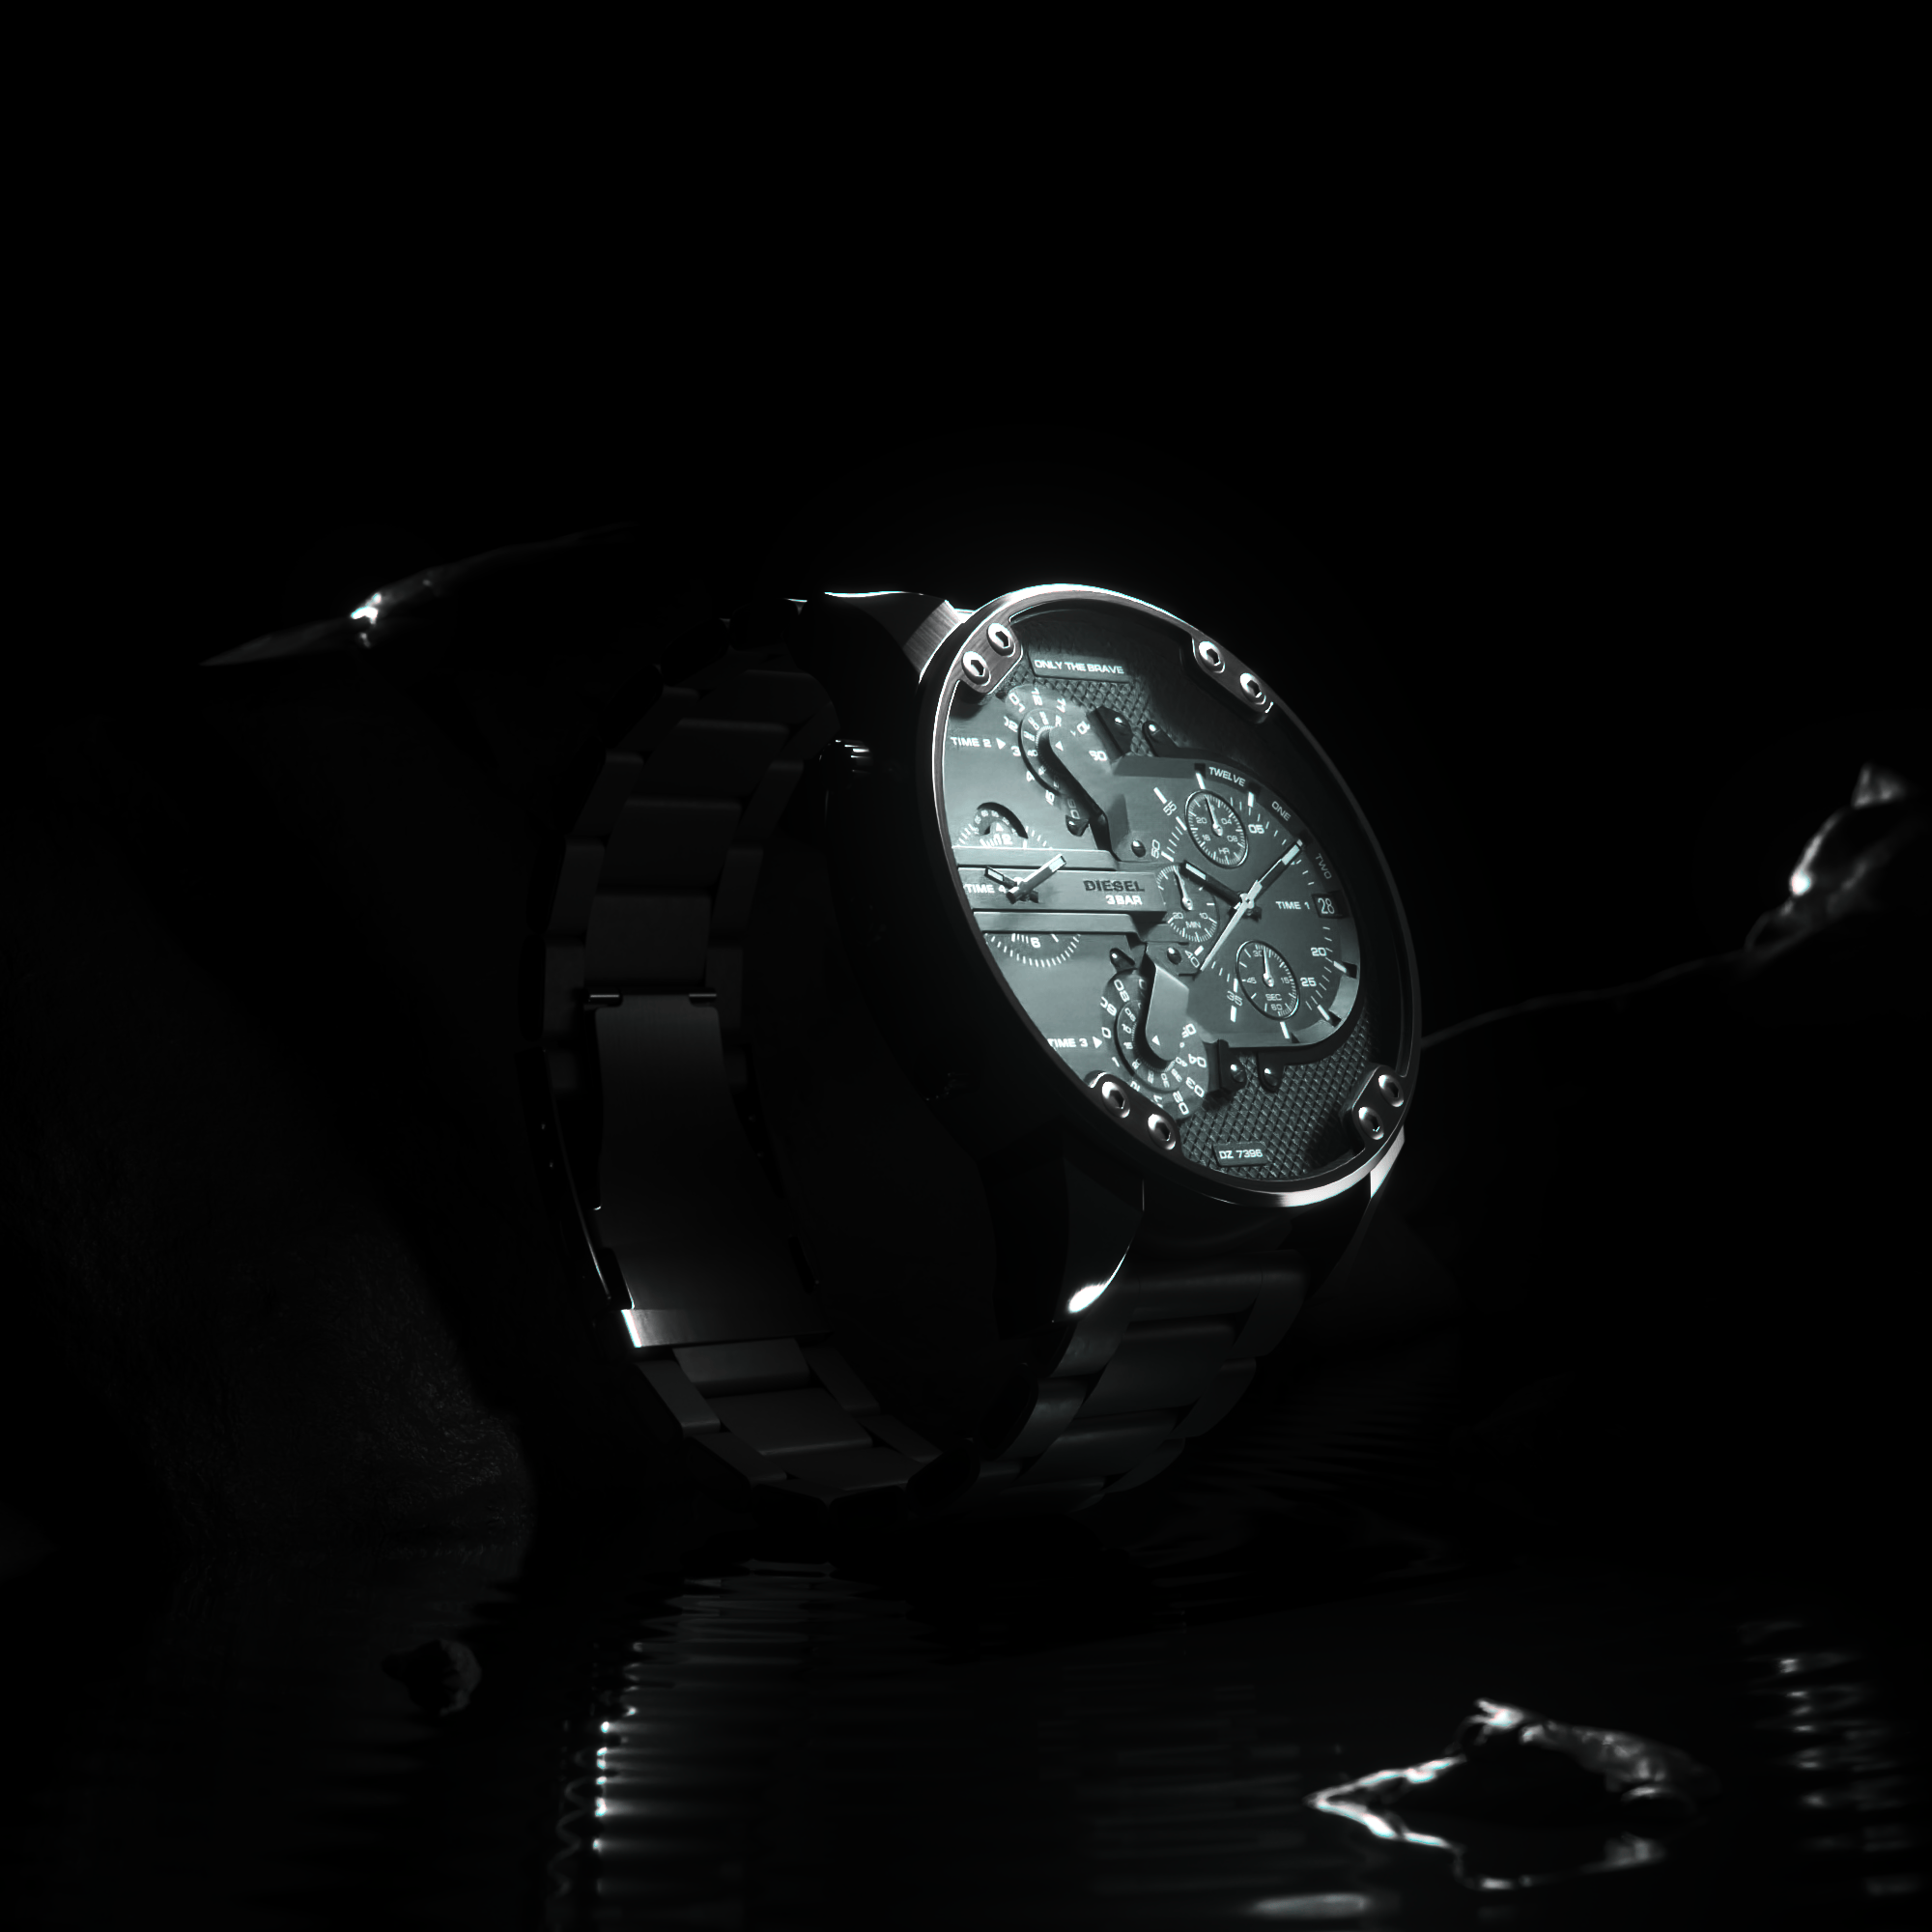 Animation of a watch for Diesel - Finished Projects - Blender Artists ...